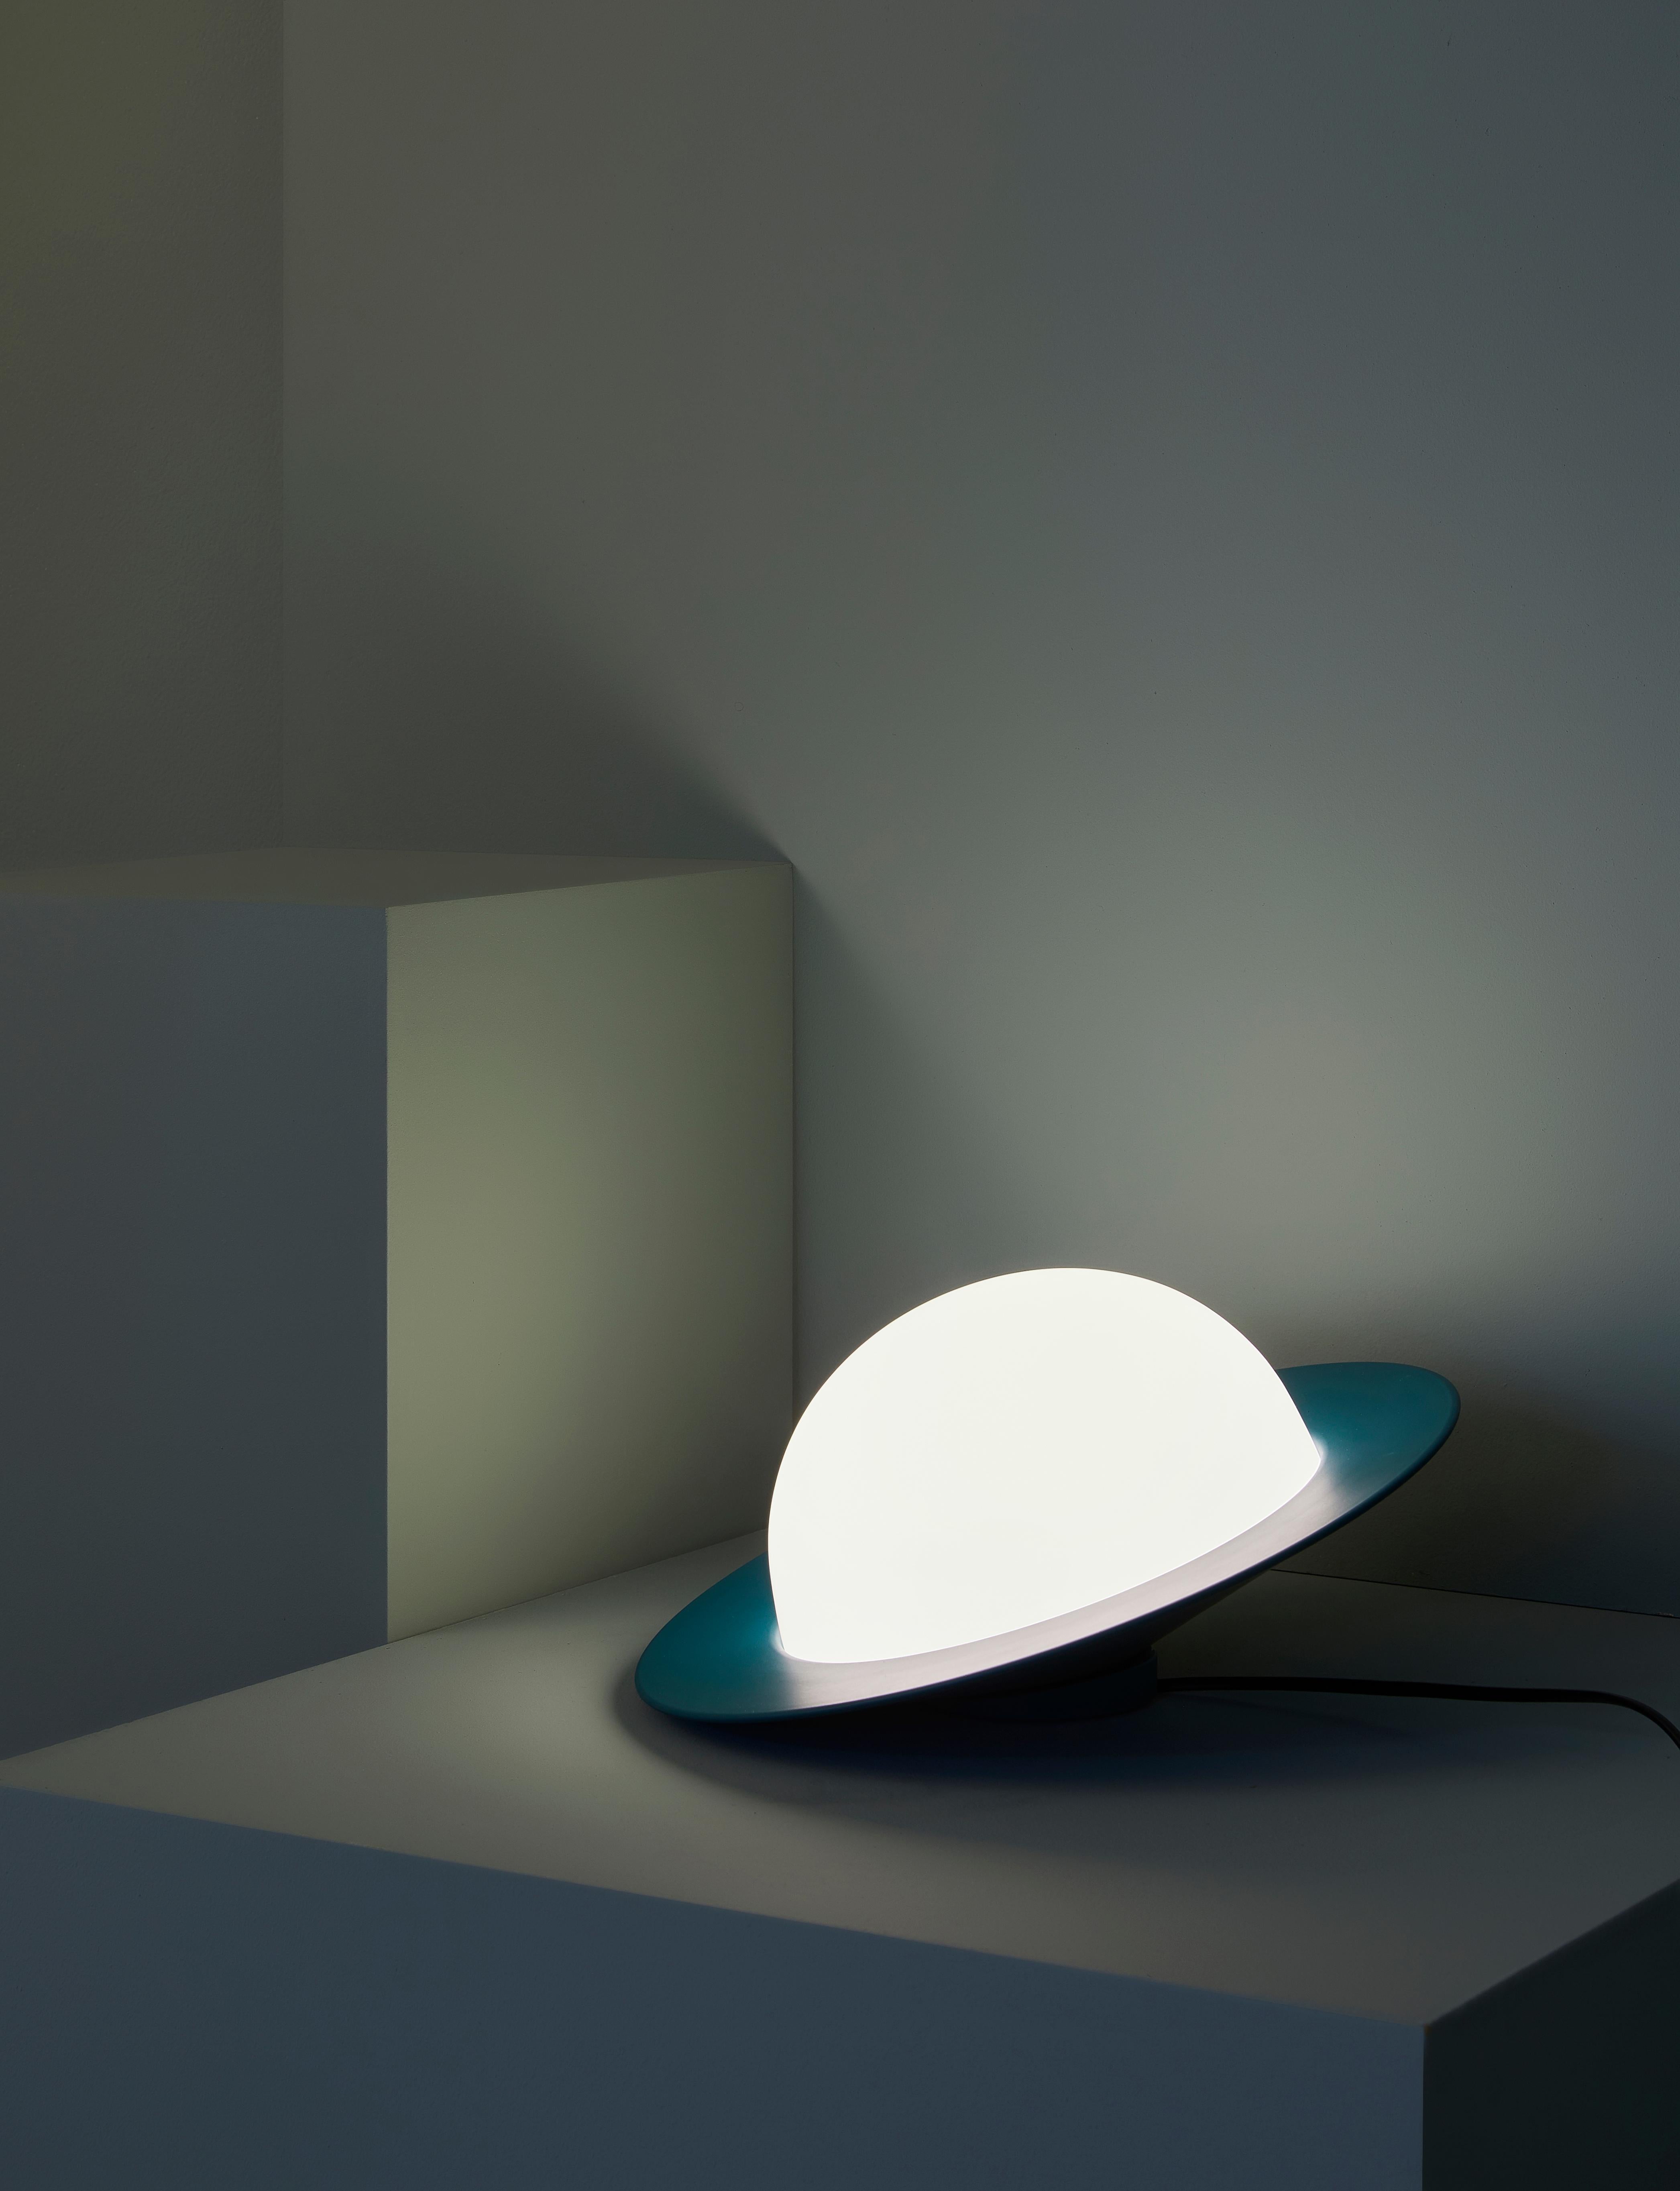 Alley table lamp by AGO Lighting
UL Listed

Painted aluminum, white opal glass
LED G9 110-240V (not included)

Available colors:
Charcoal, white, grey, burgundy and green

Measures: Tilt version
16.2 x 32.2 cm (Large)
11.4 x 22.7 cm (Small)

Still